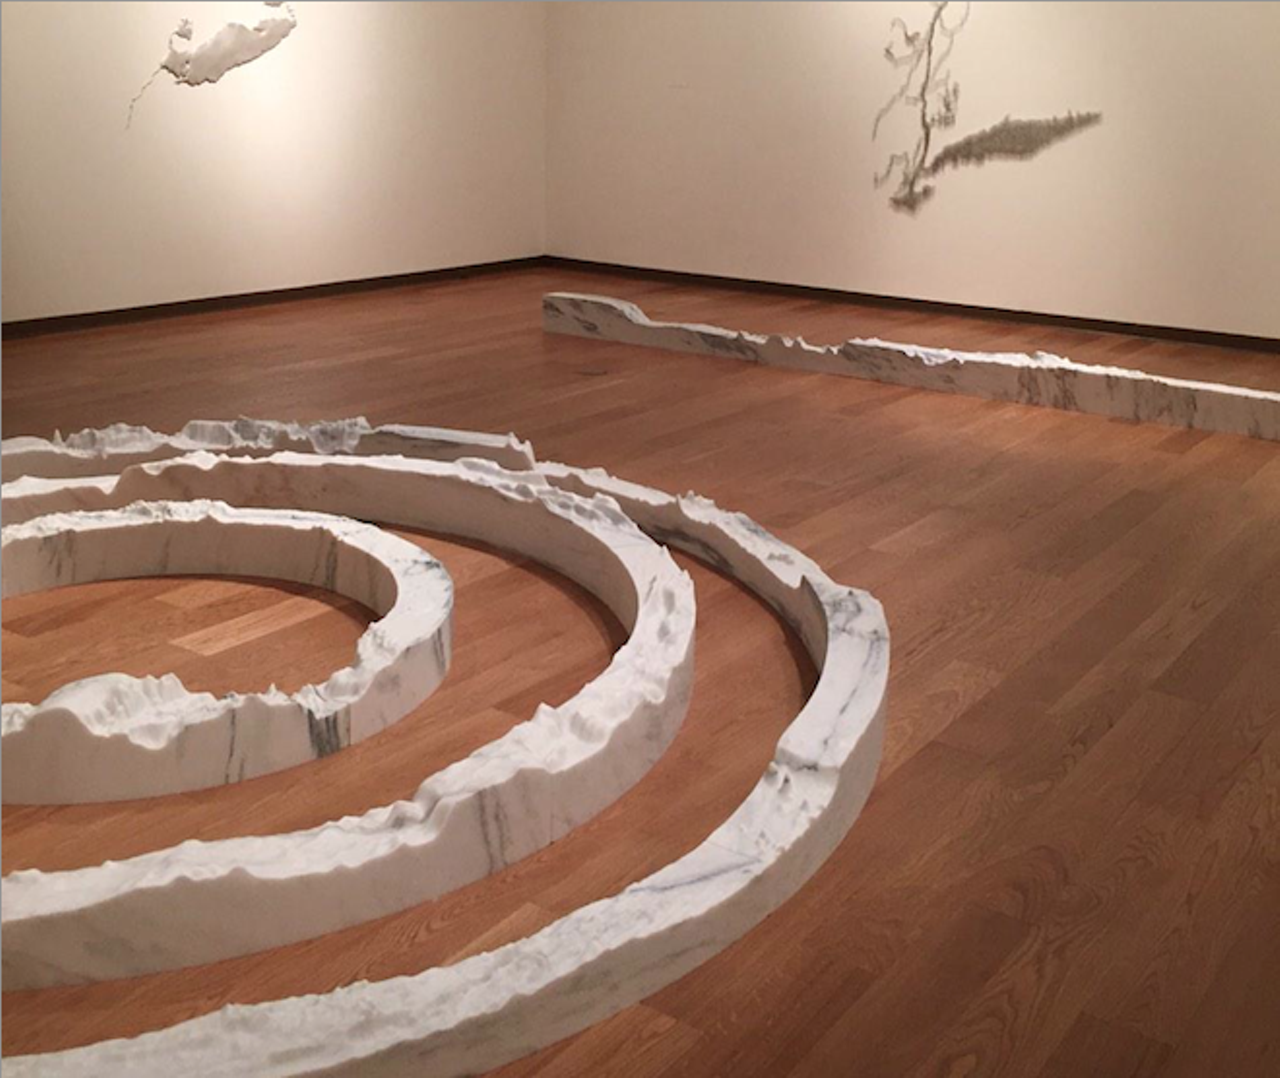 "Equator" by Maya Lin, from The History of Water at Orlando Museum of Art